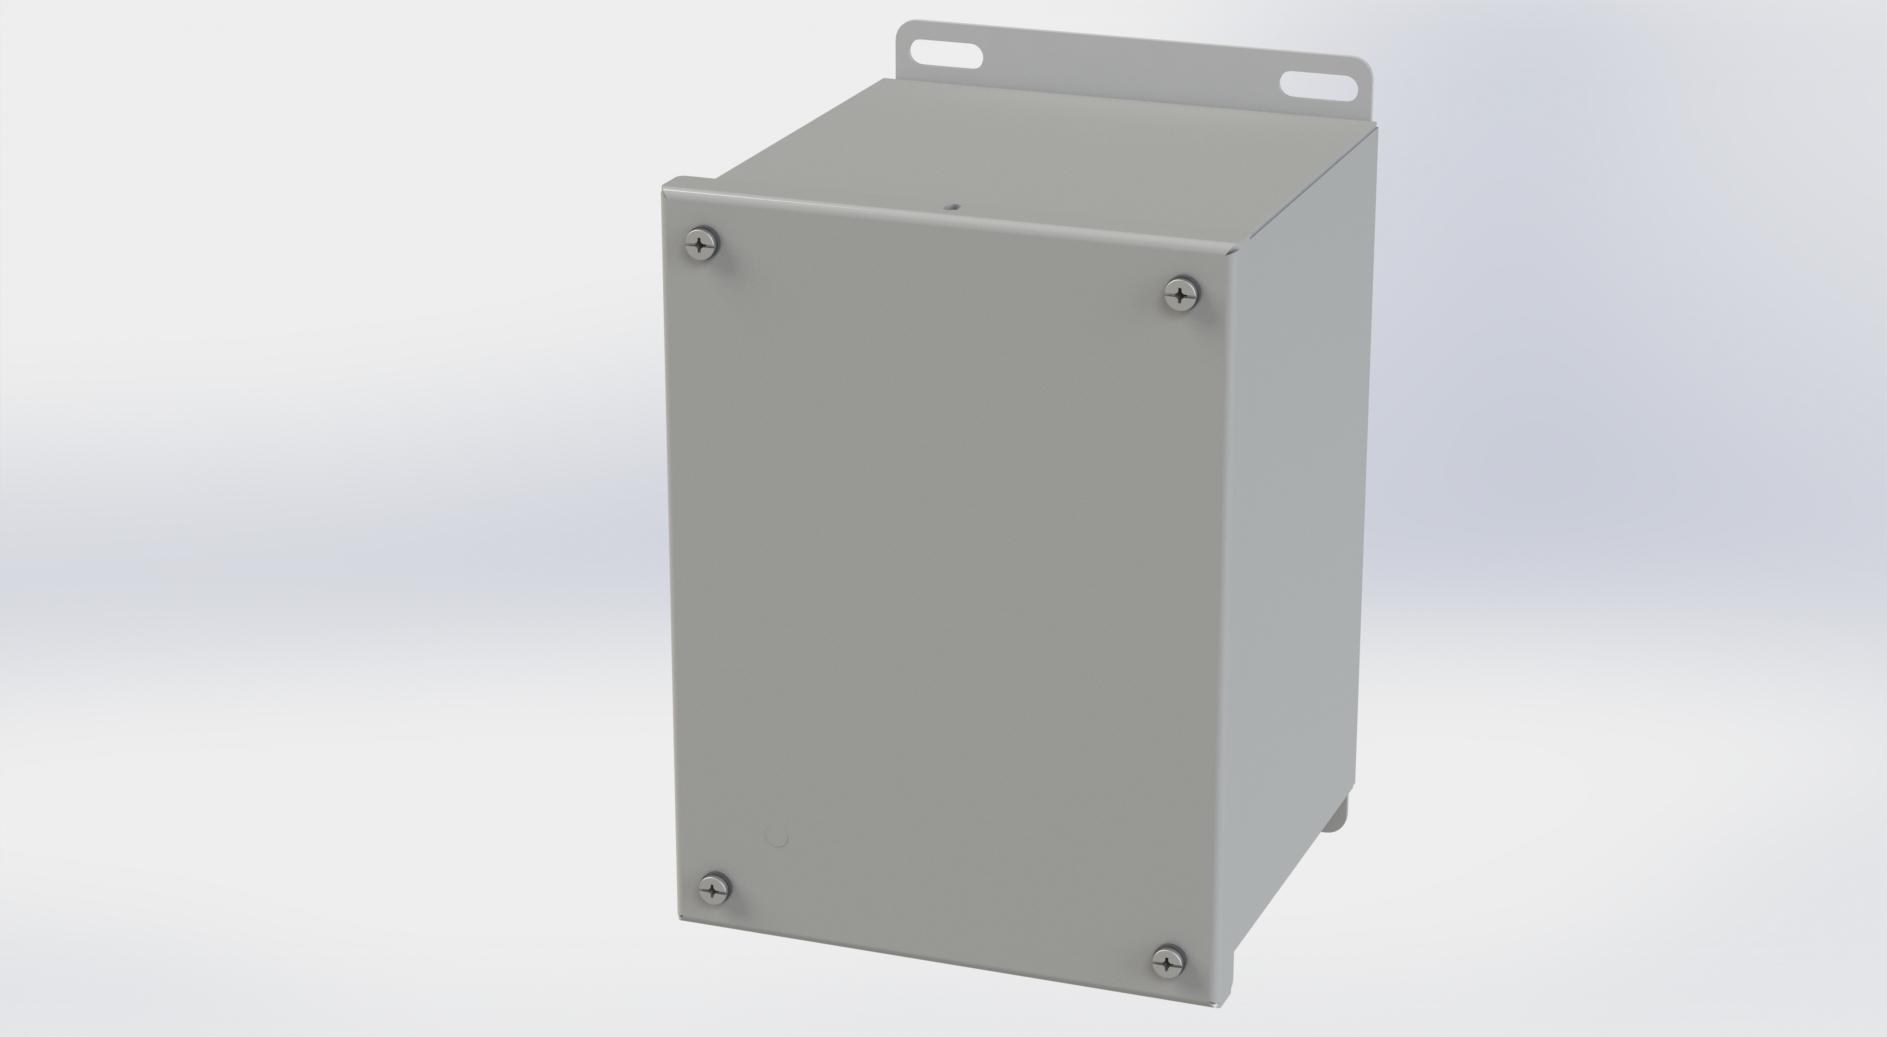 Saginaw Control SCE-8066SC SC Enclosure, Height:8.13", Width:6.00", Depth:6.00", ANSI-61 gray powder coating inside and out.  Optional sub-panels are powder coated white.